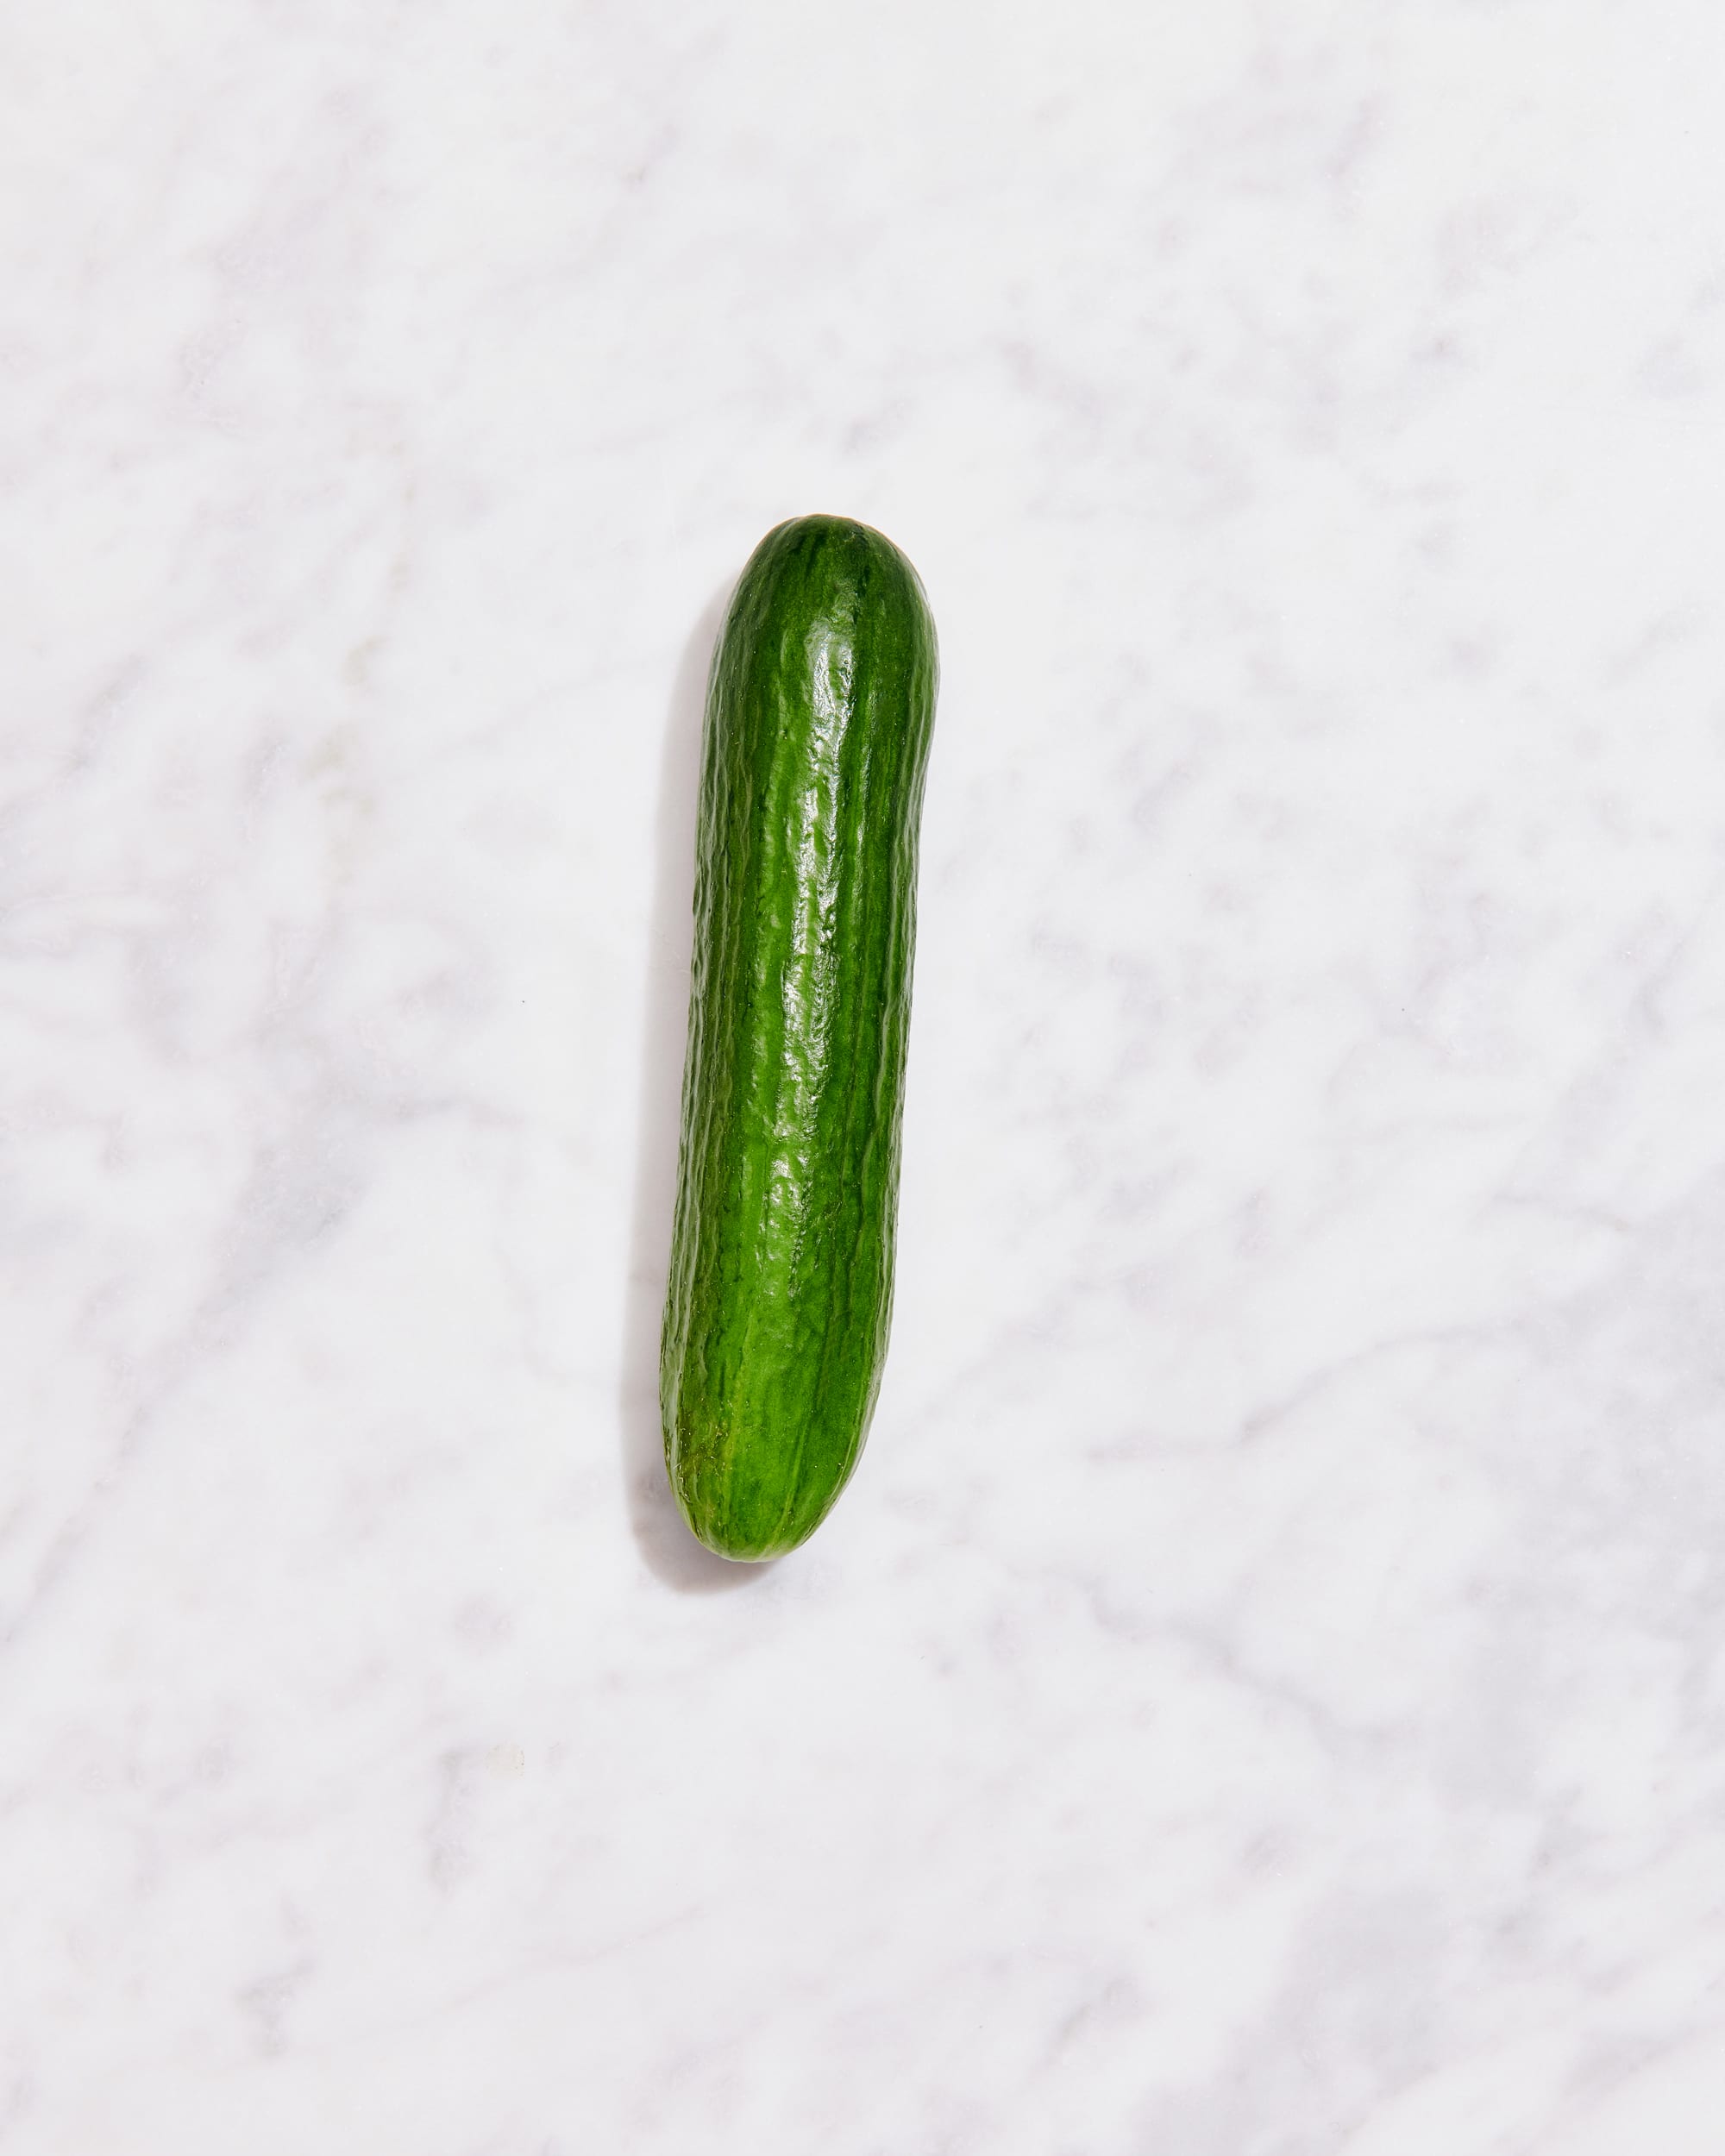 How To Store Cucumbers So They Stay Crisp